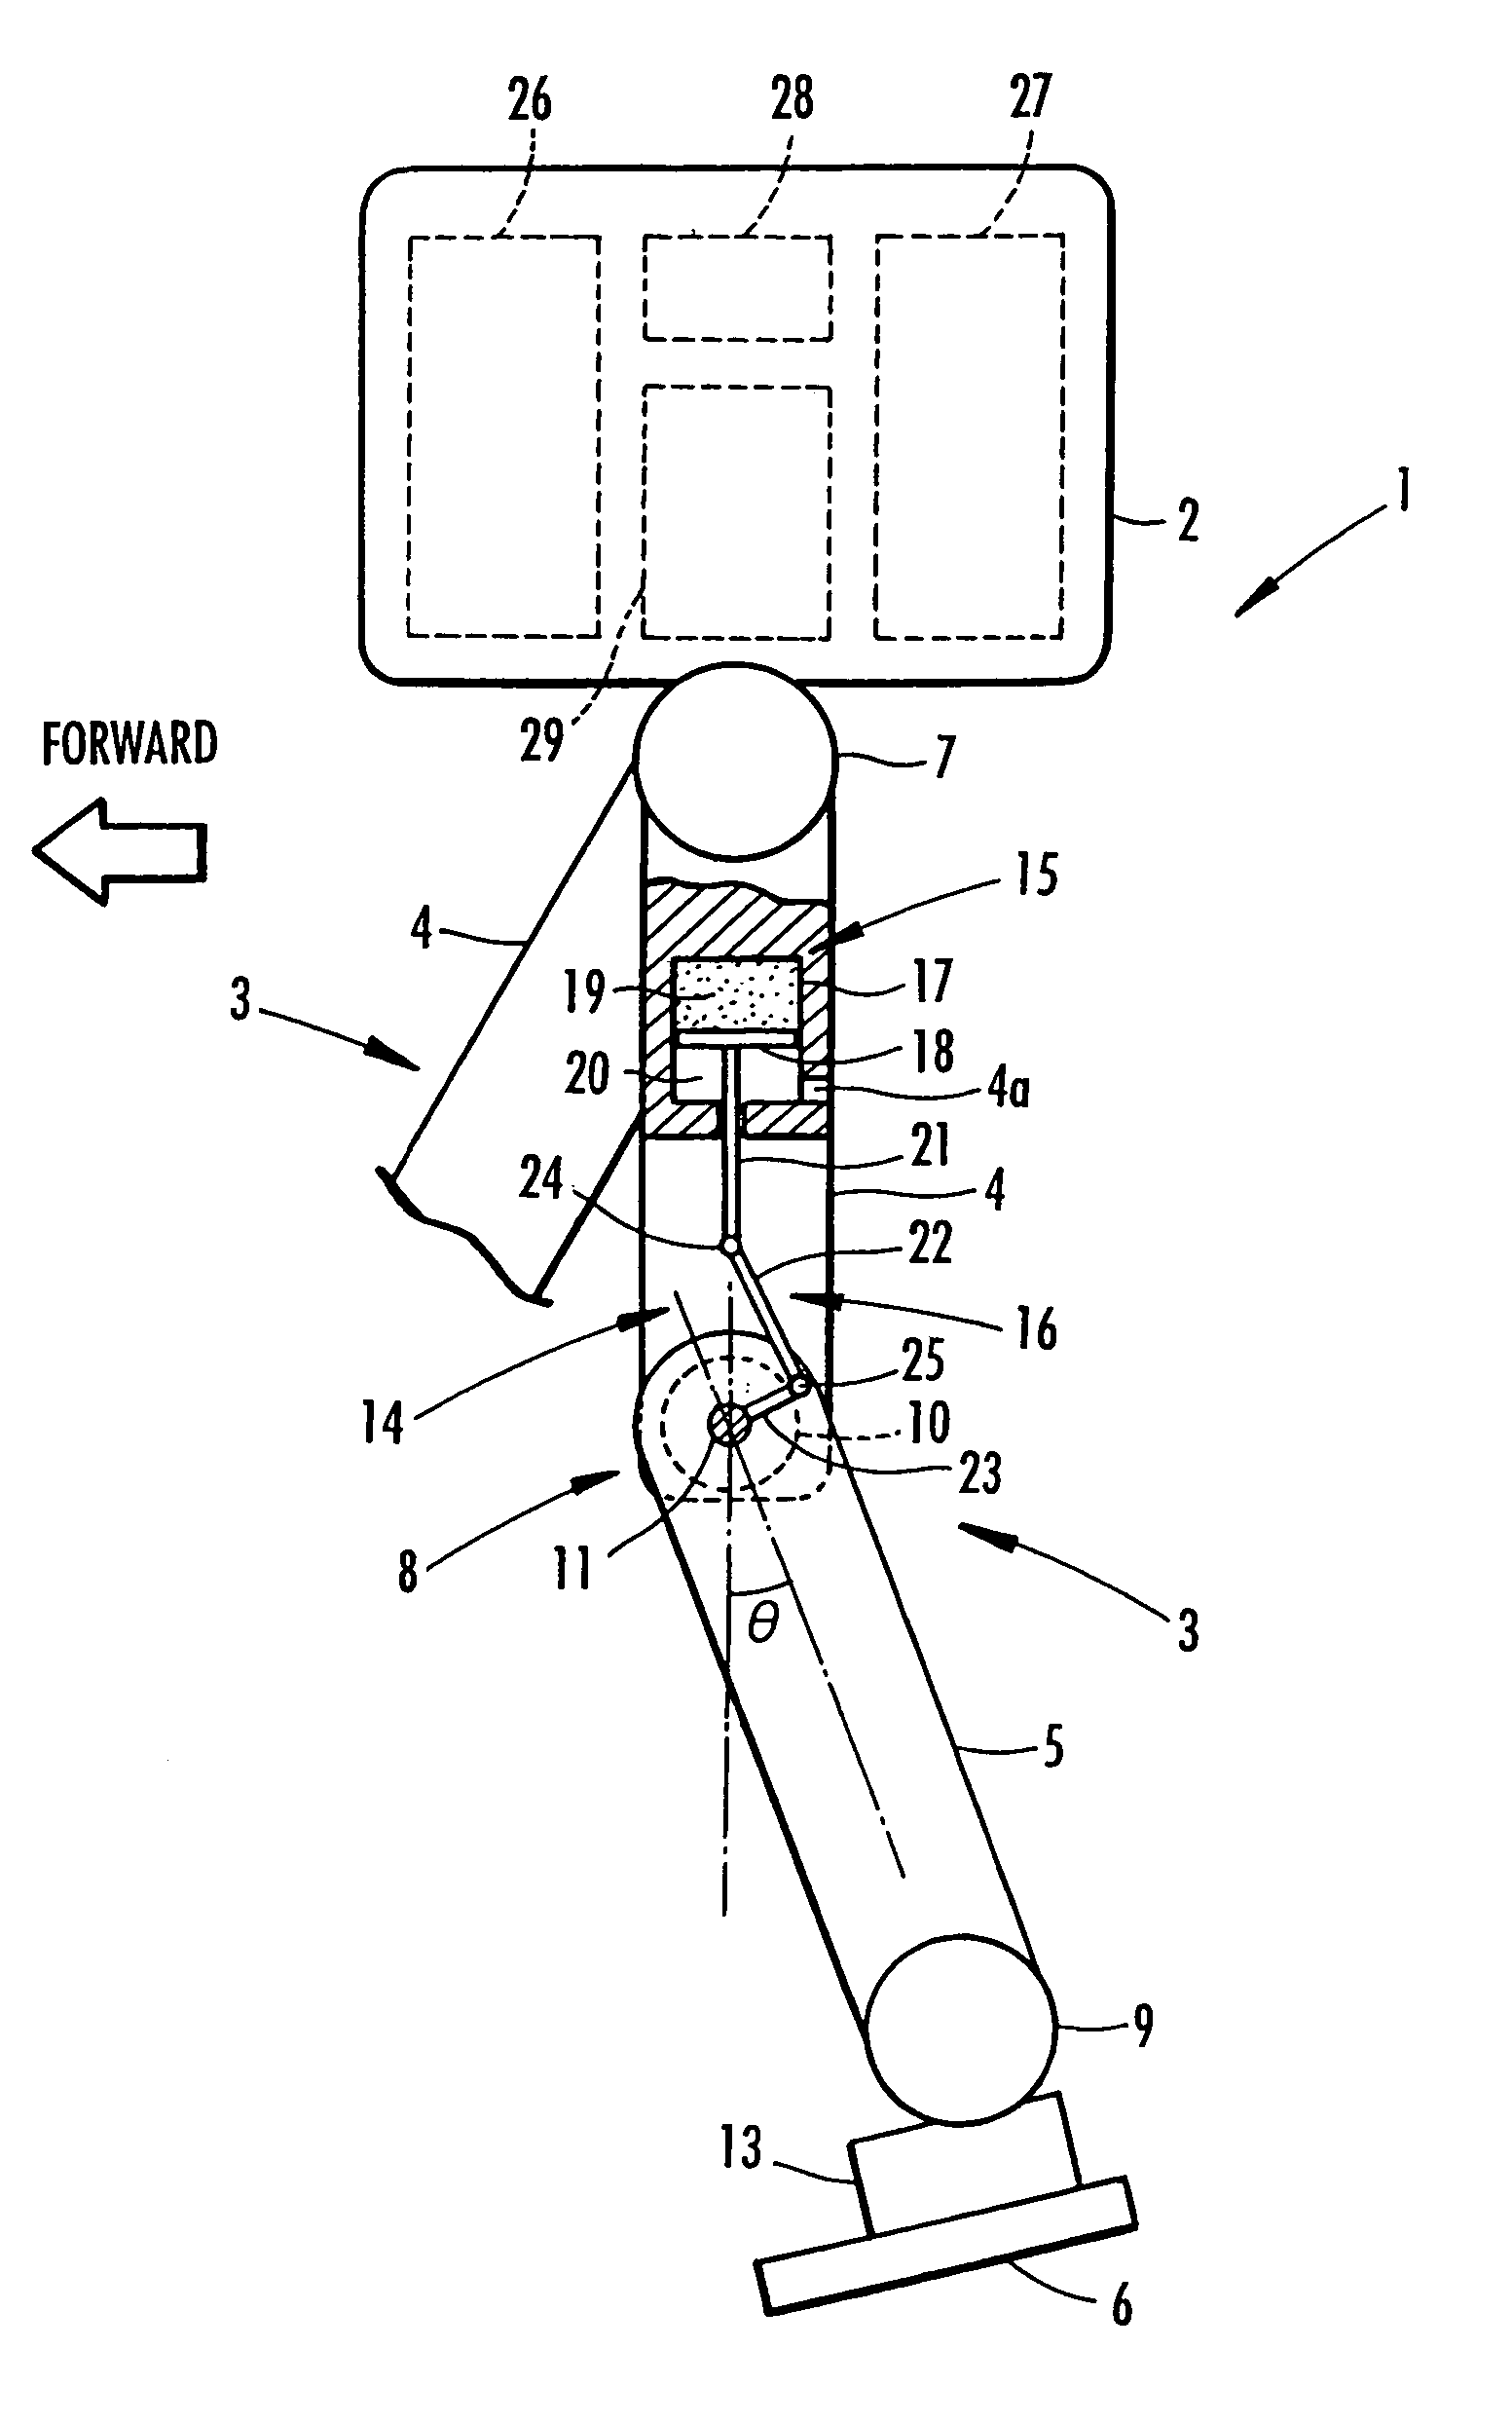 Leg joint assist device for legged movable robot